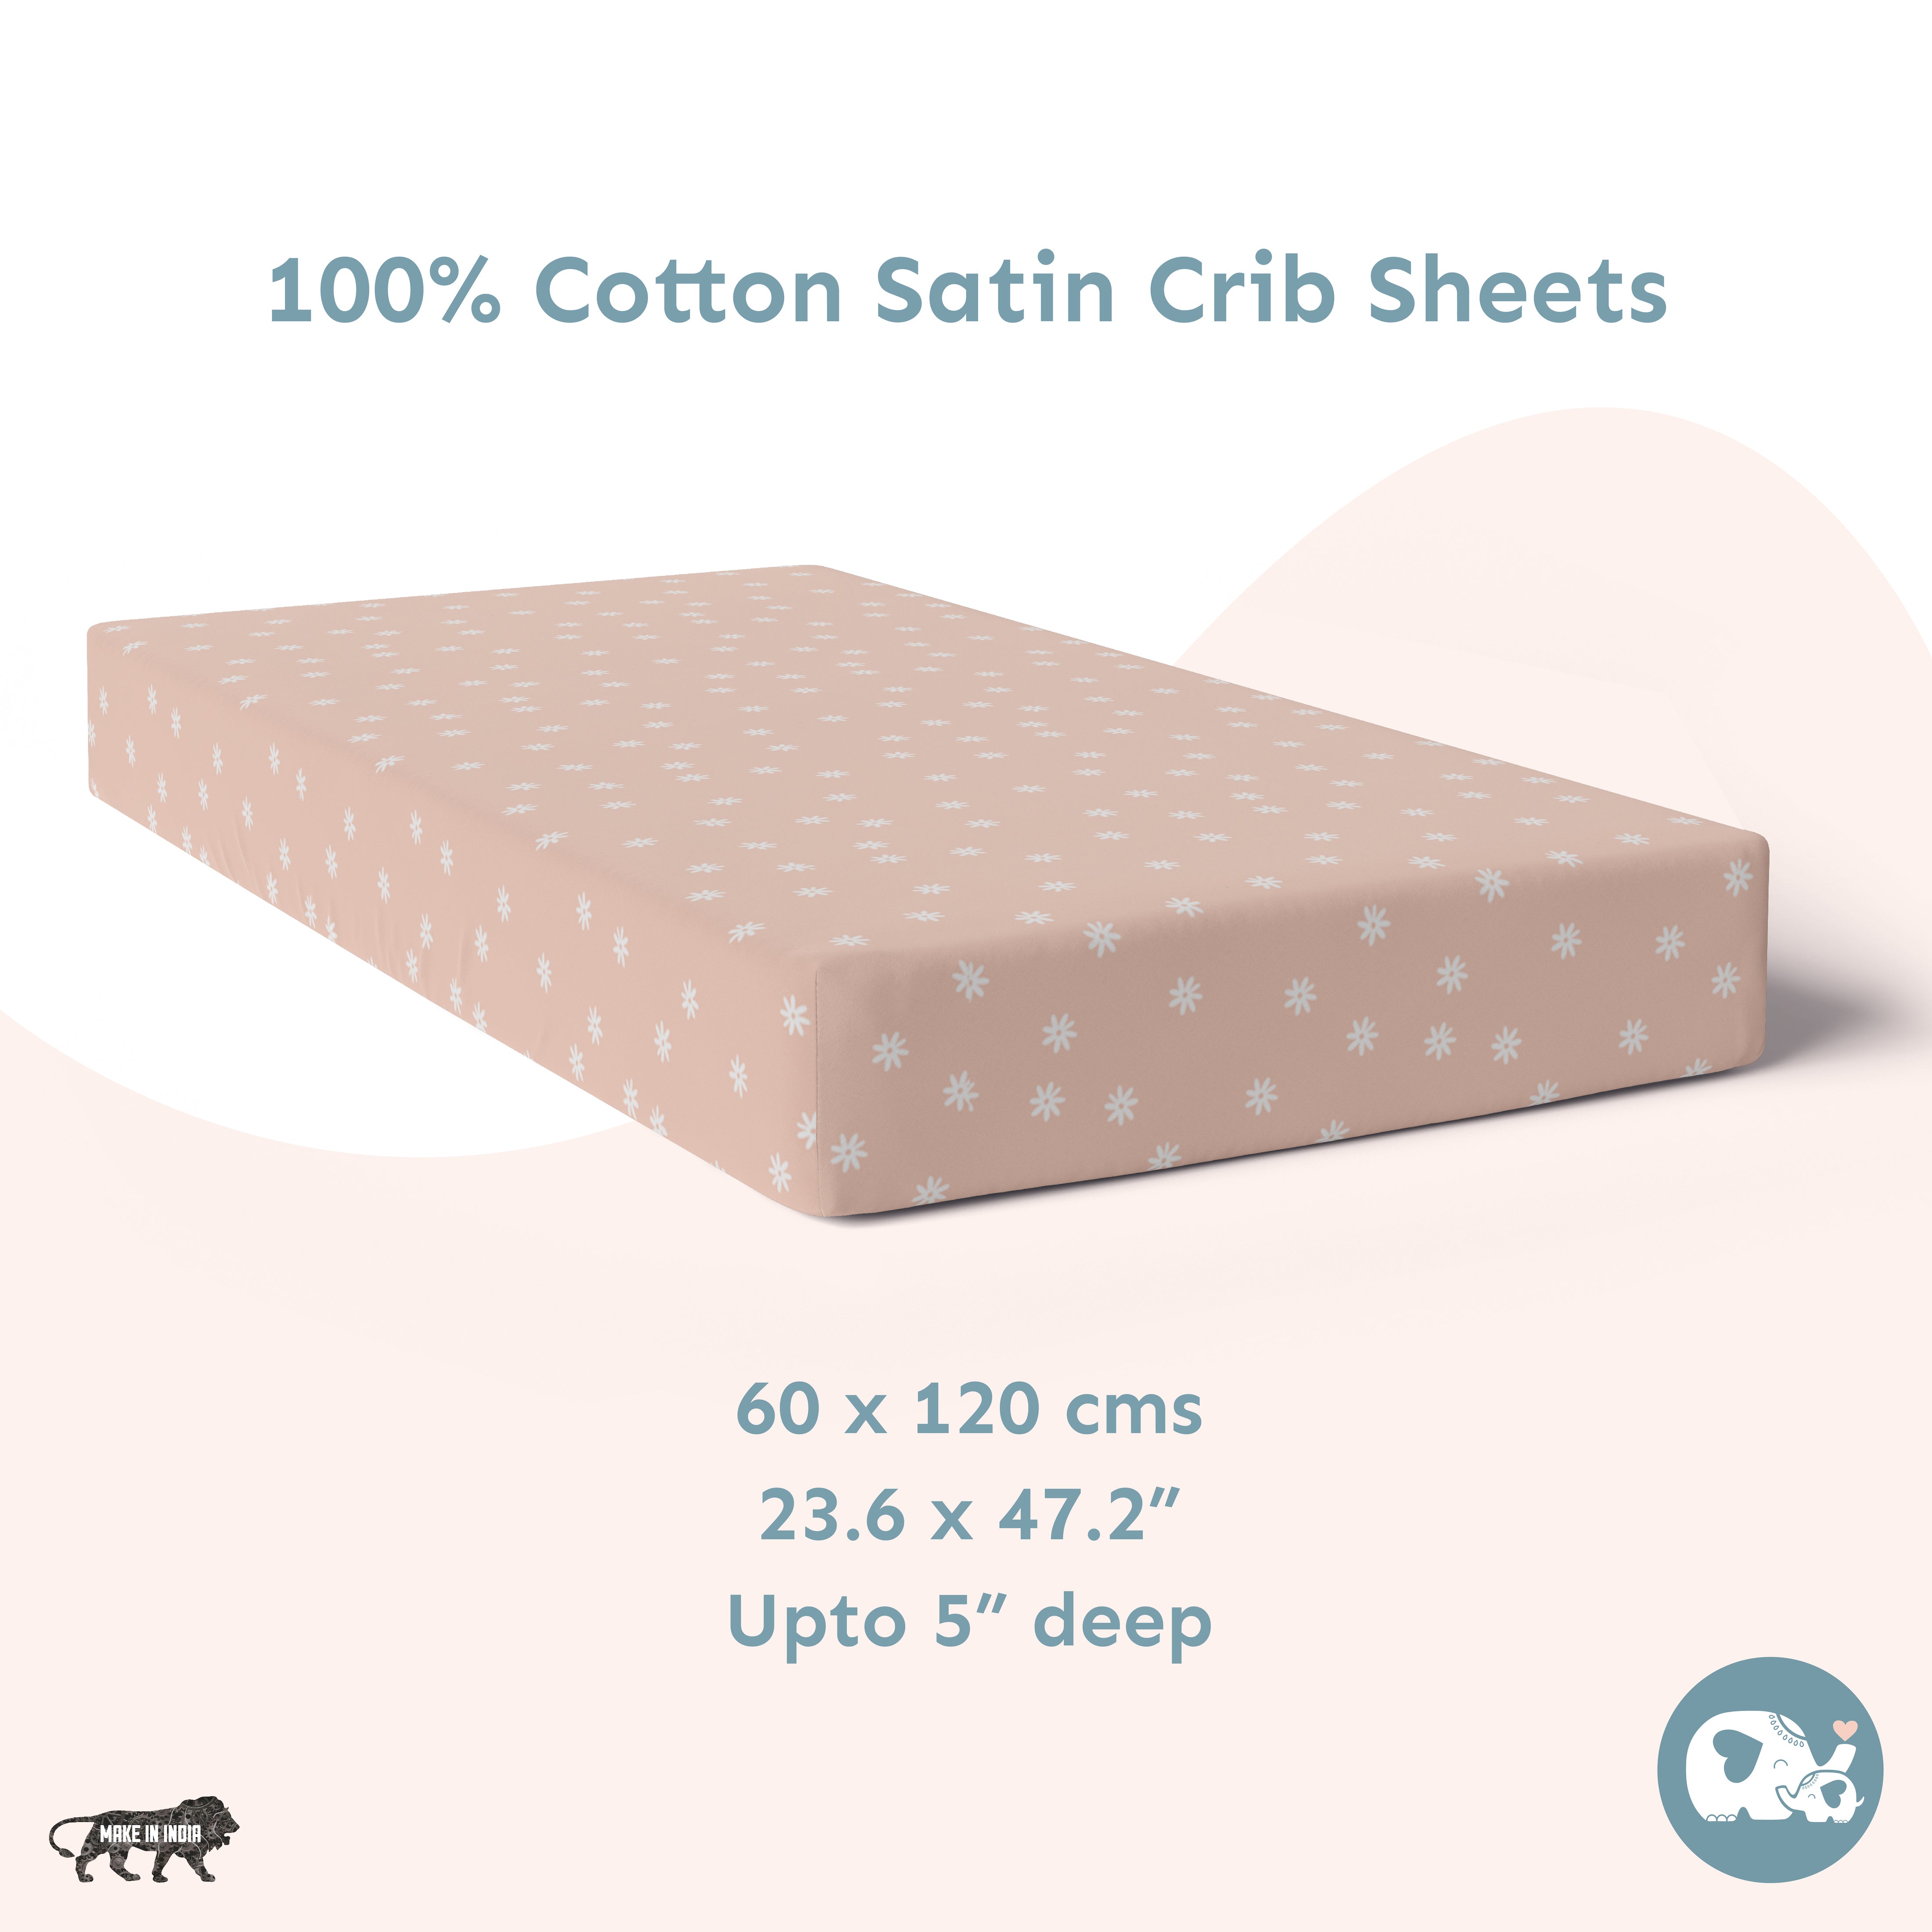 Baby Cot Fitted Sheets / 140 x 80 / Blush Daisy